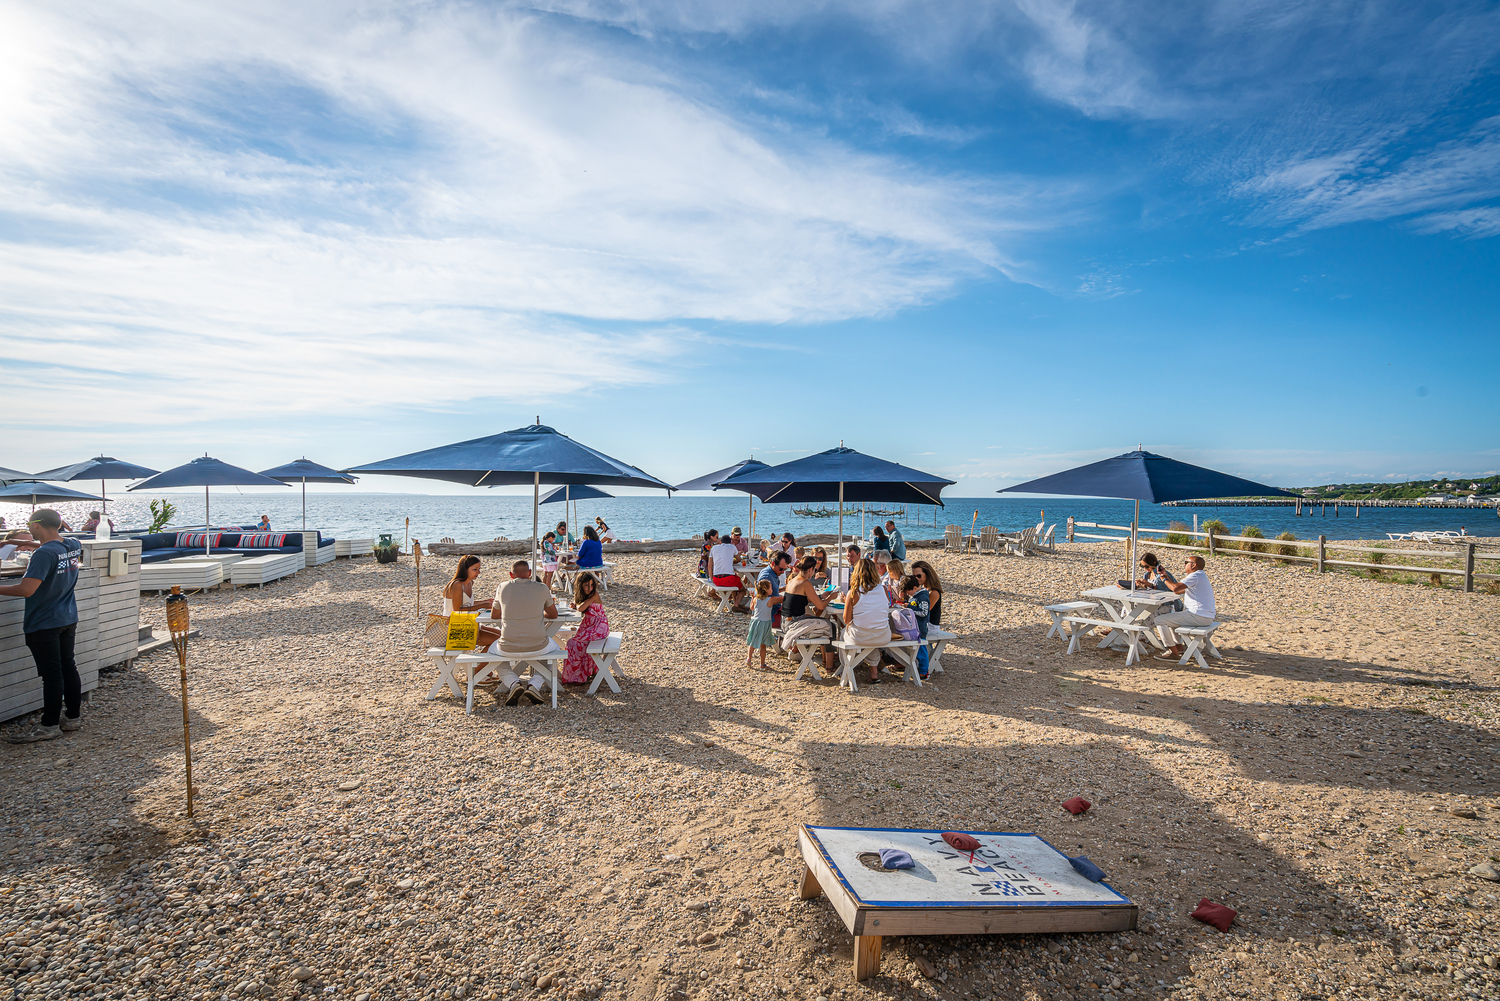 The scene at Navy Beach in Montauk, which opens for its 15th season on April 26. COURTESY NAVY BEACH